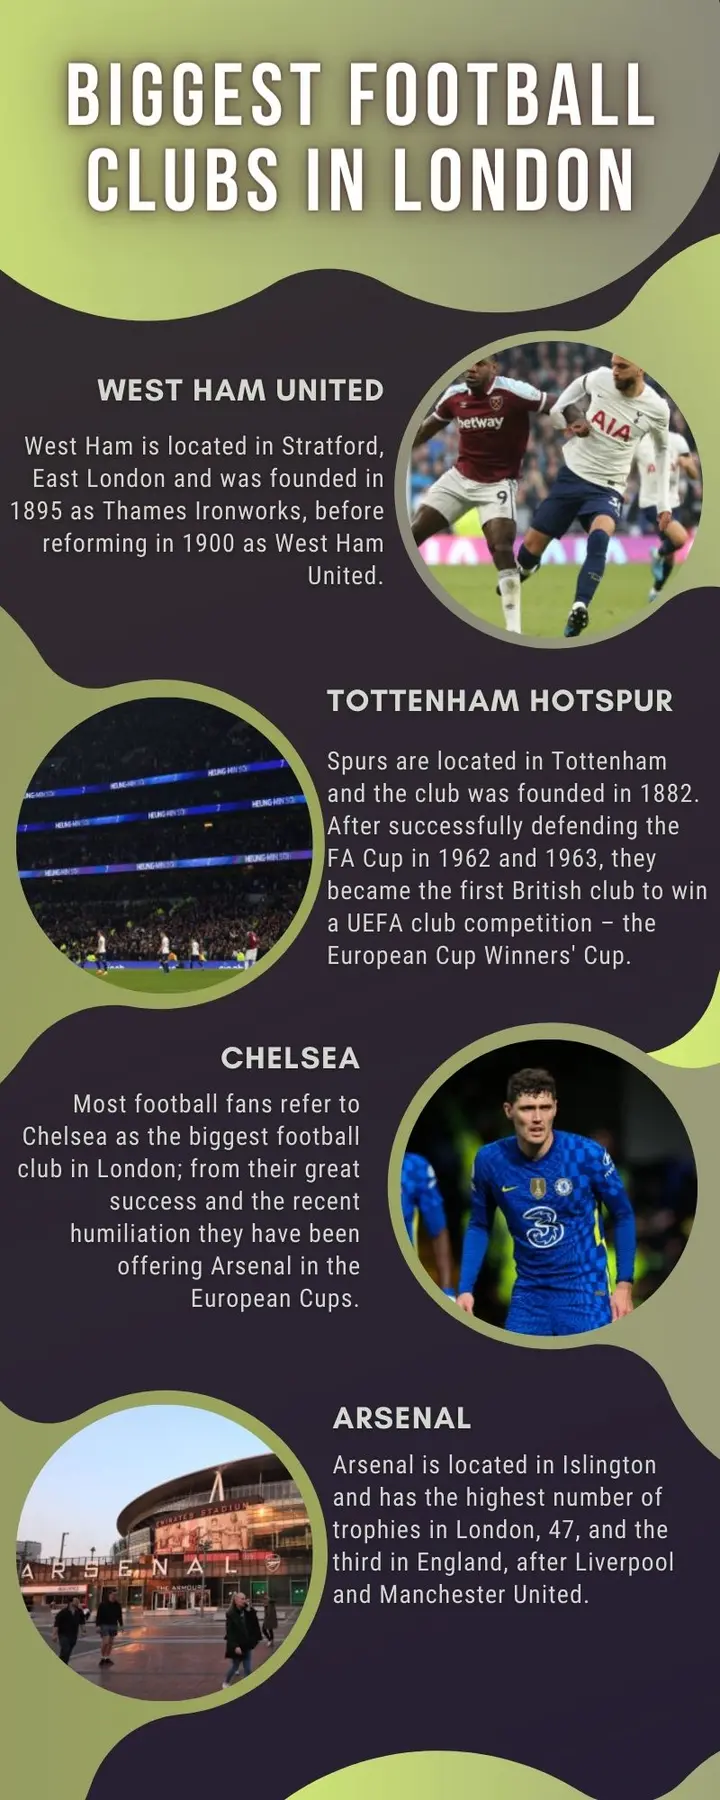 Biggest football clubs in London